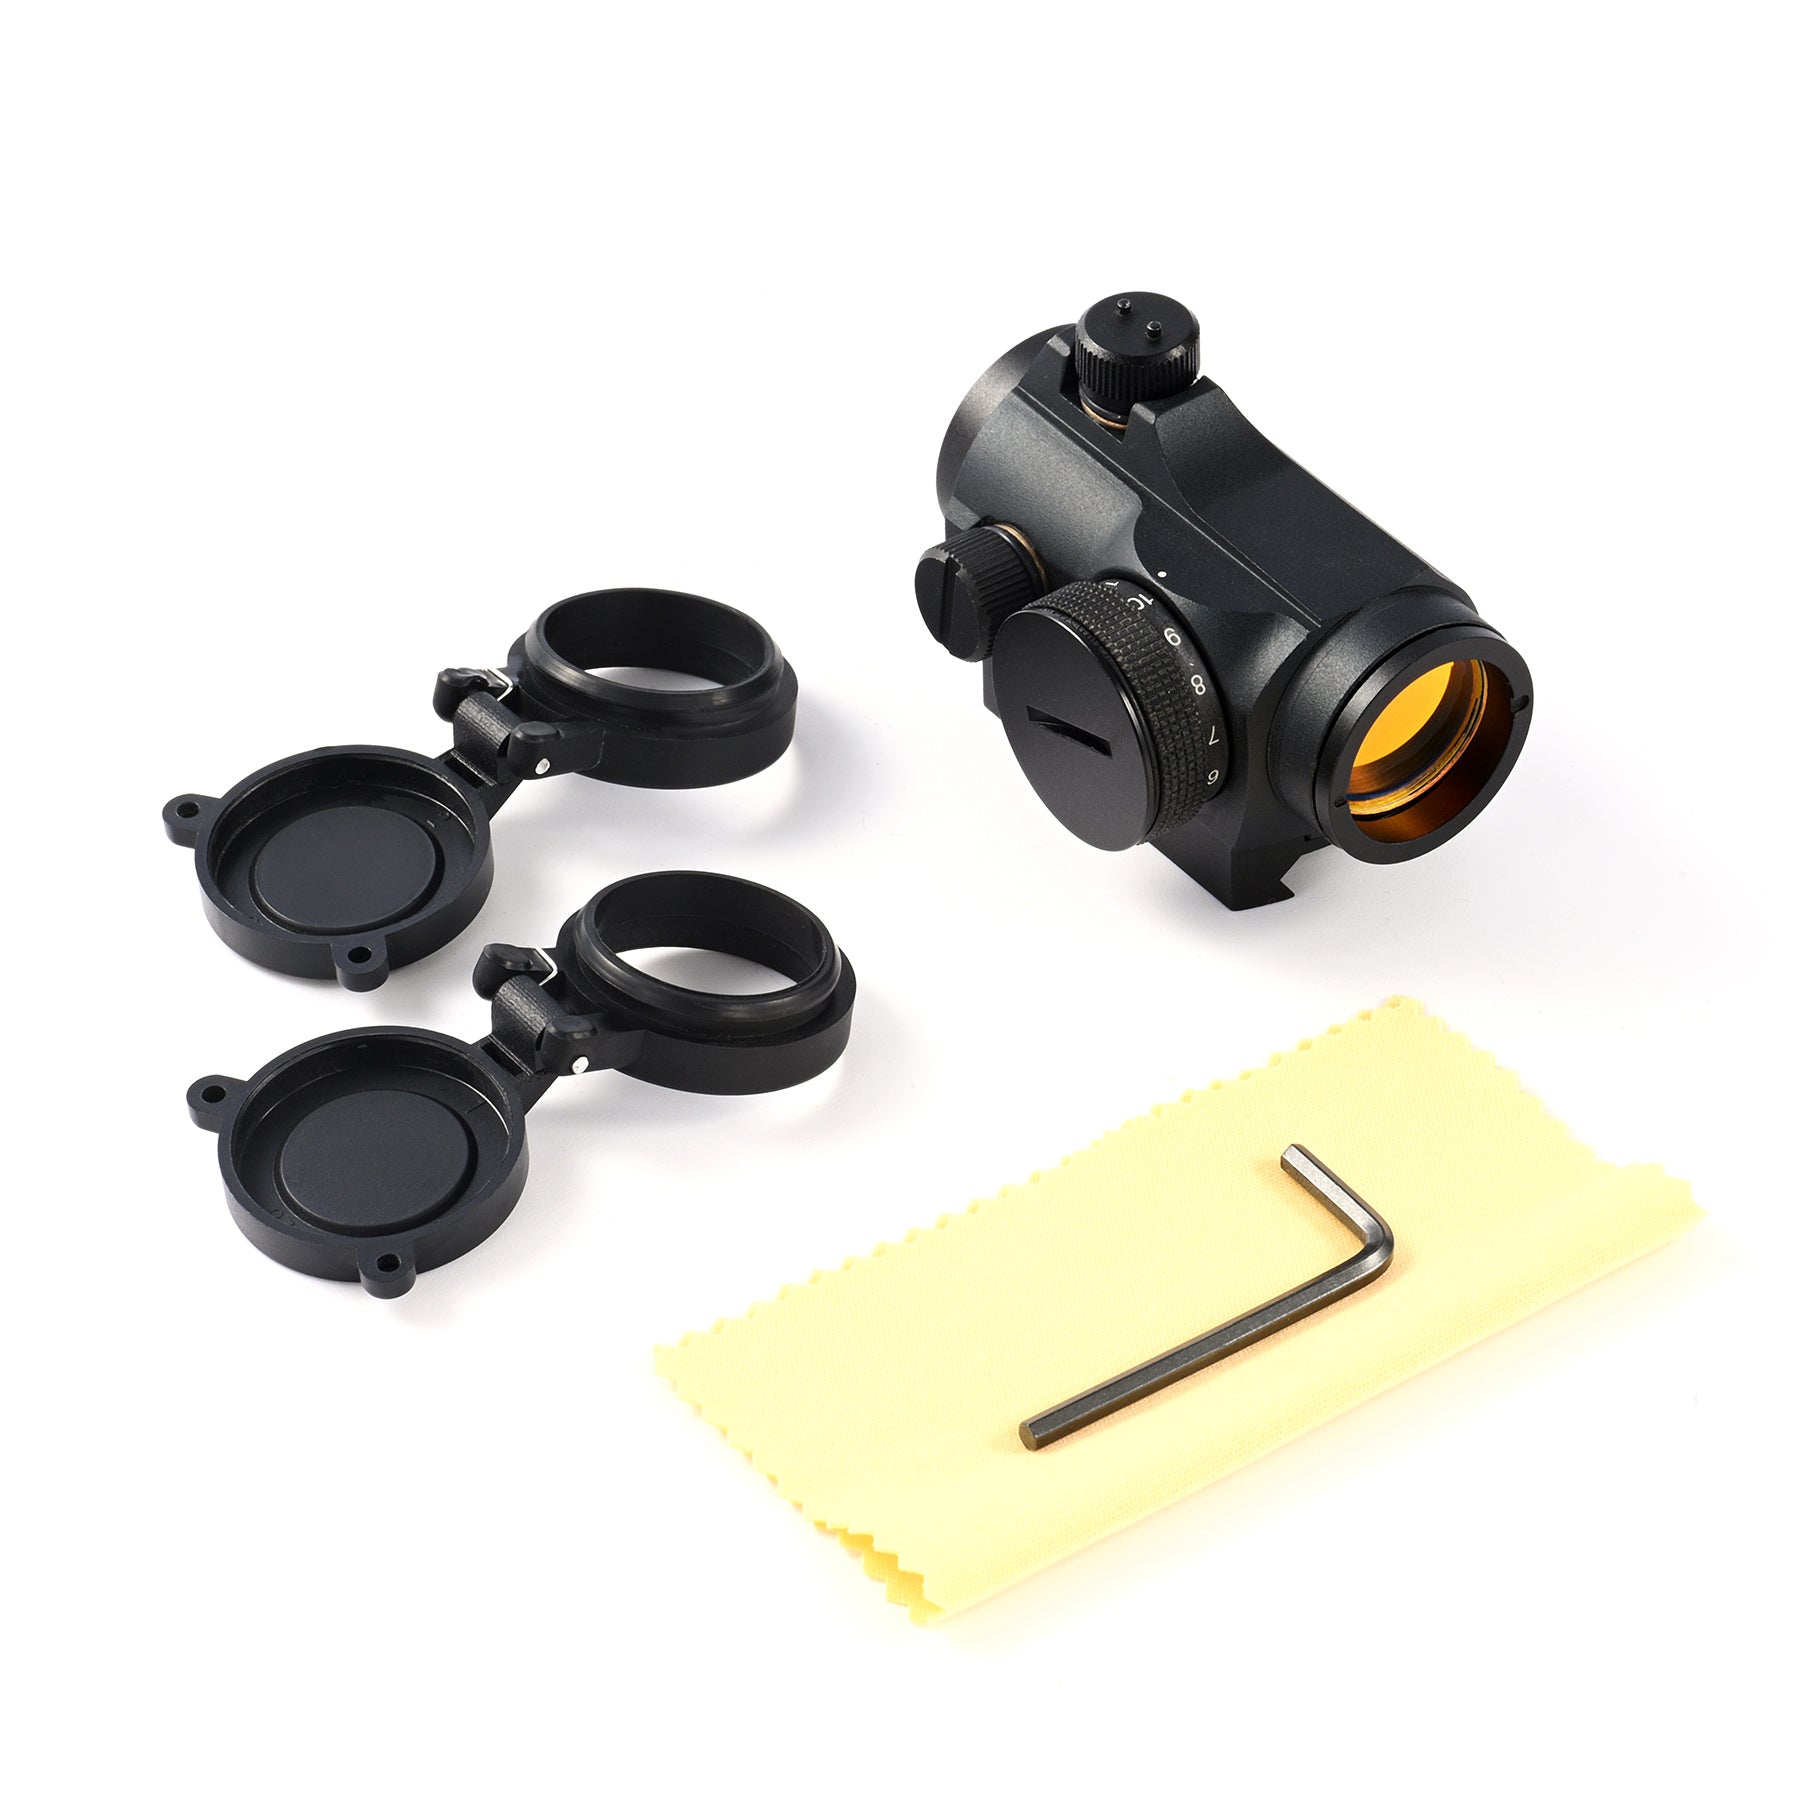 1x22 Red Dot Sight, Micro Reflex Sight 3 MOA Rifle Scope with Fogproof 22mm Objective Lens for Standard Picatinny or Weaver Rail, Battery Included, Black